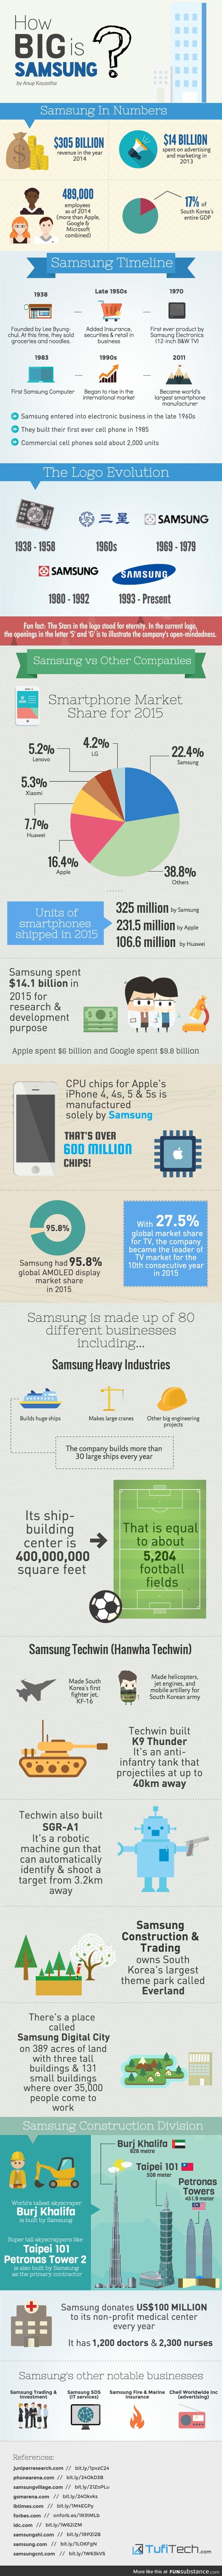 This Infographic Shows How Unbelievably Big Samsung Is